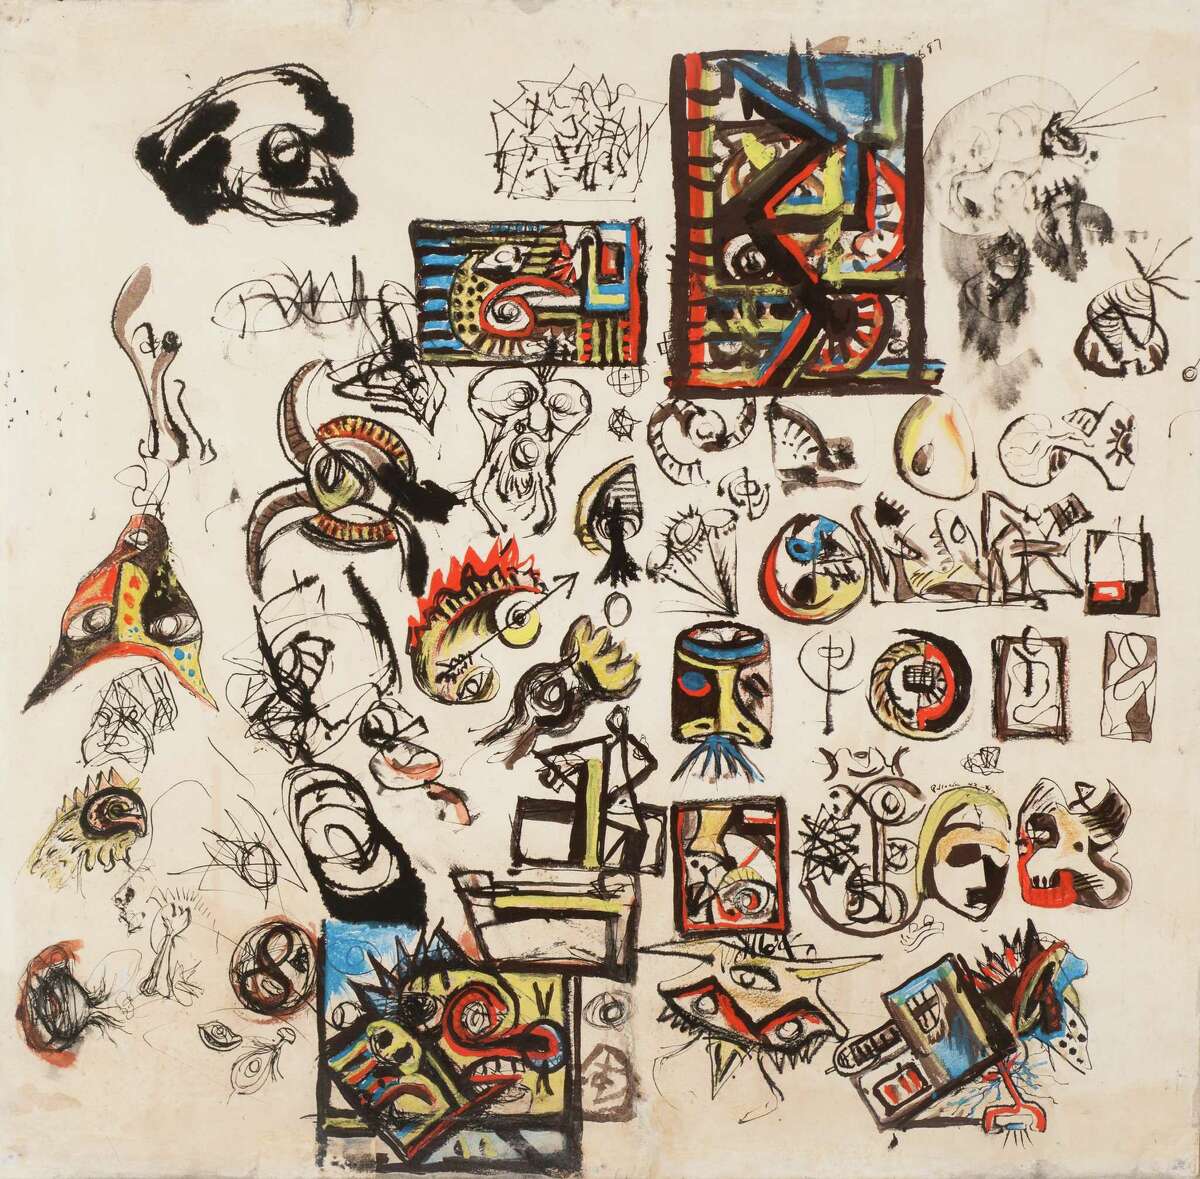 This drawing by Jackson Pollock is on view in "The Beginning of Everything" at the Menil Collection through June 18. [Jackson Pollock, Untitled (Drawing with two signatures), 1943-1947. Gouache, pen, and ink on paper, 22 Â½ x 23 in. (57.2 x 58.4 cm). Promised Gift from the Collection of Louisa Stude Sarofim. Â The Pollock-Krasner Foundation / Artists Rights Society (ARS), New York]